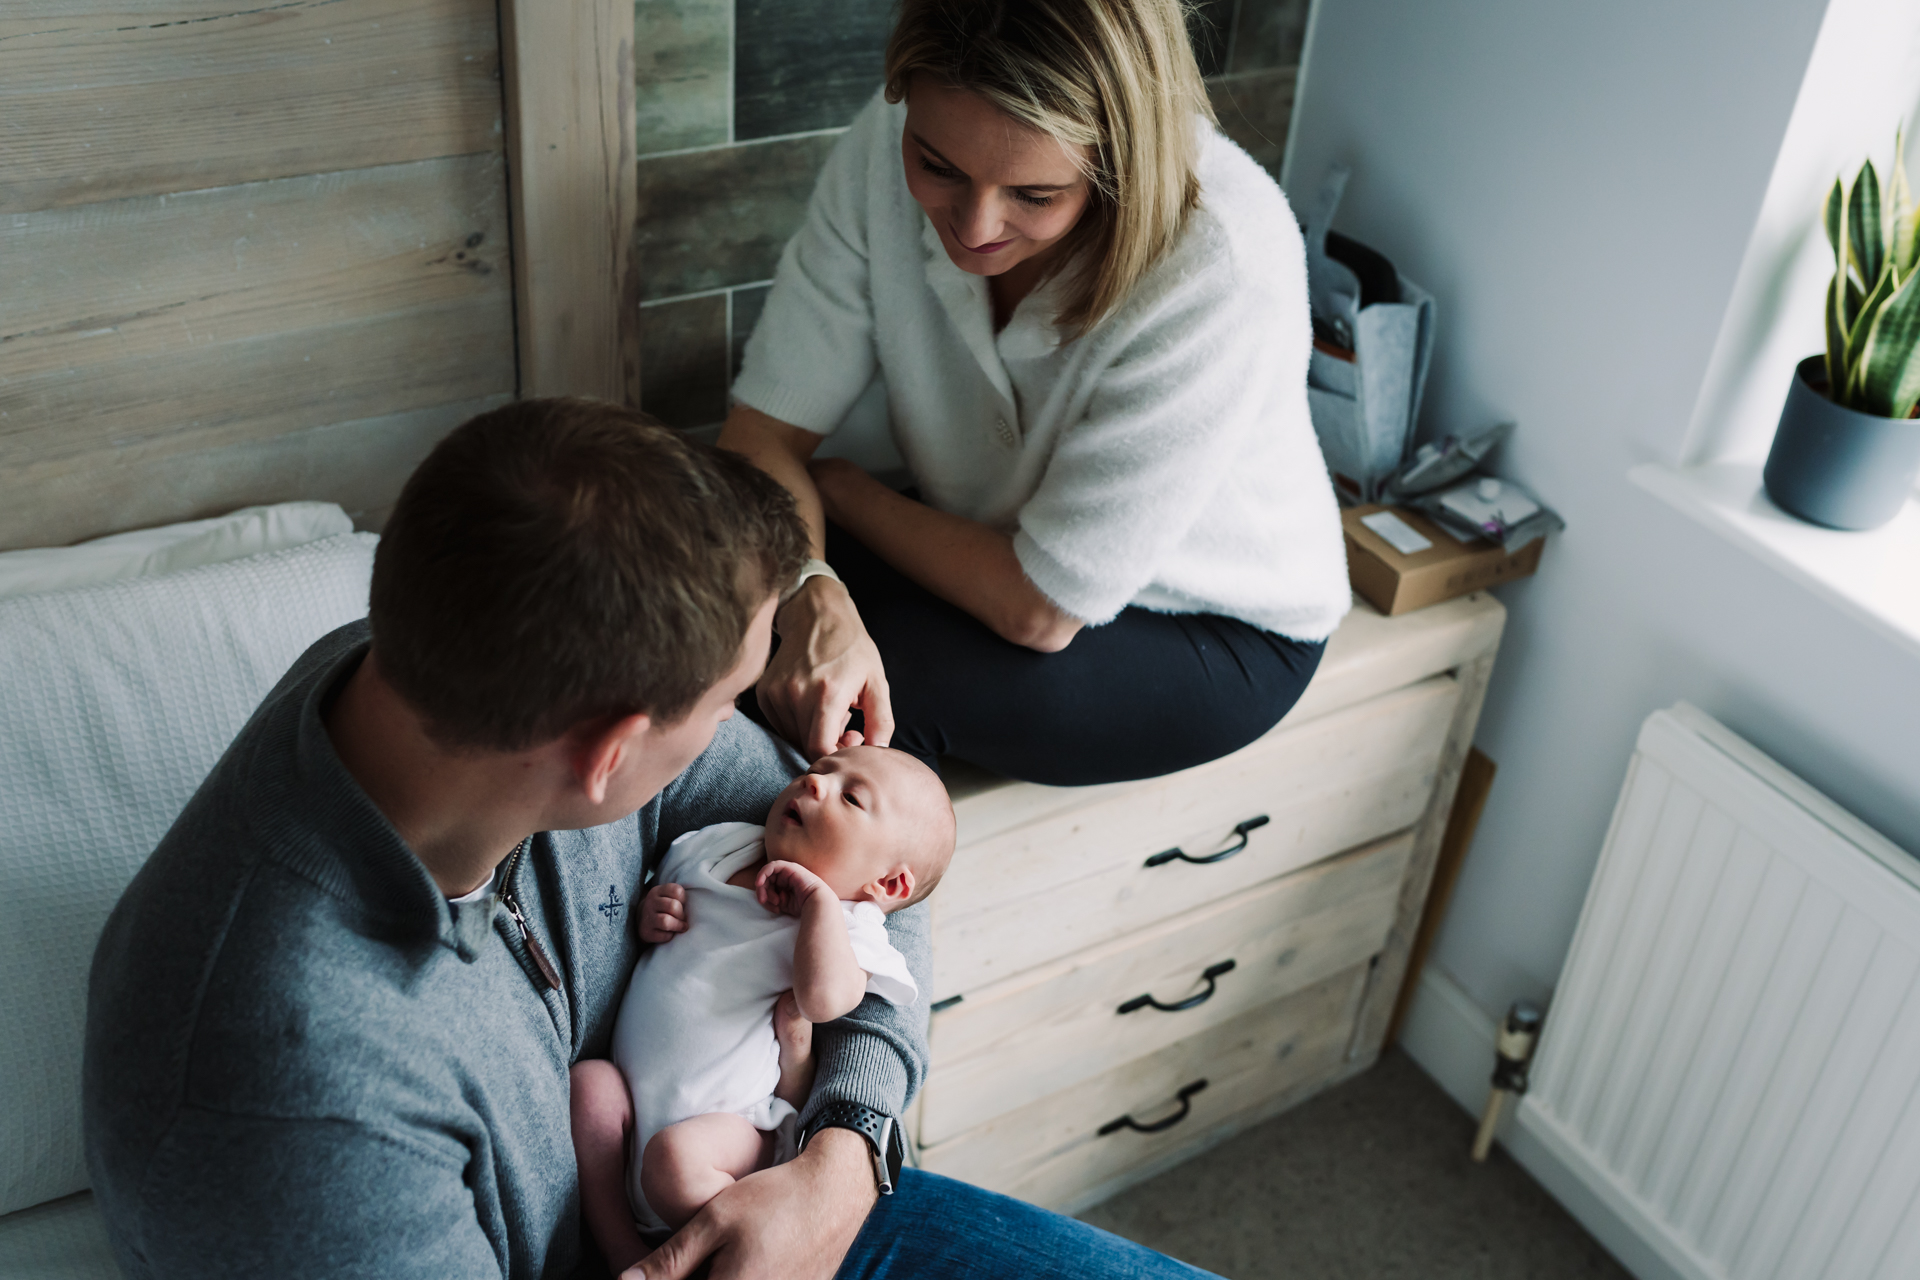 Natural window light illuminates newborn baby and her parents as they enjoy moments together at home